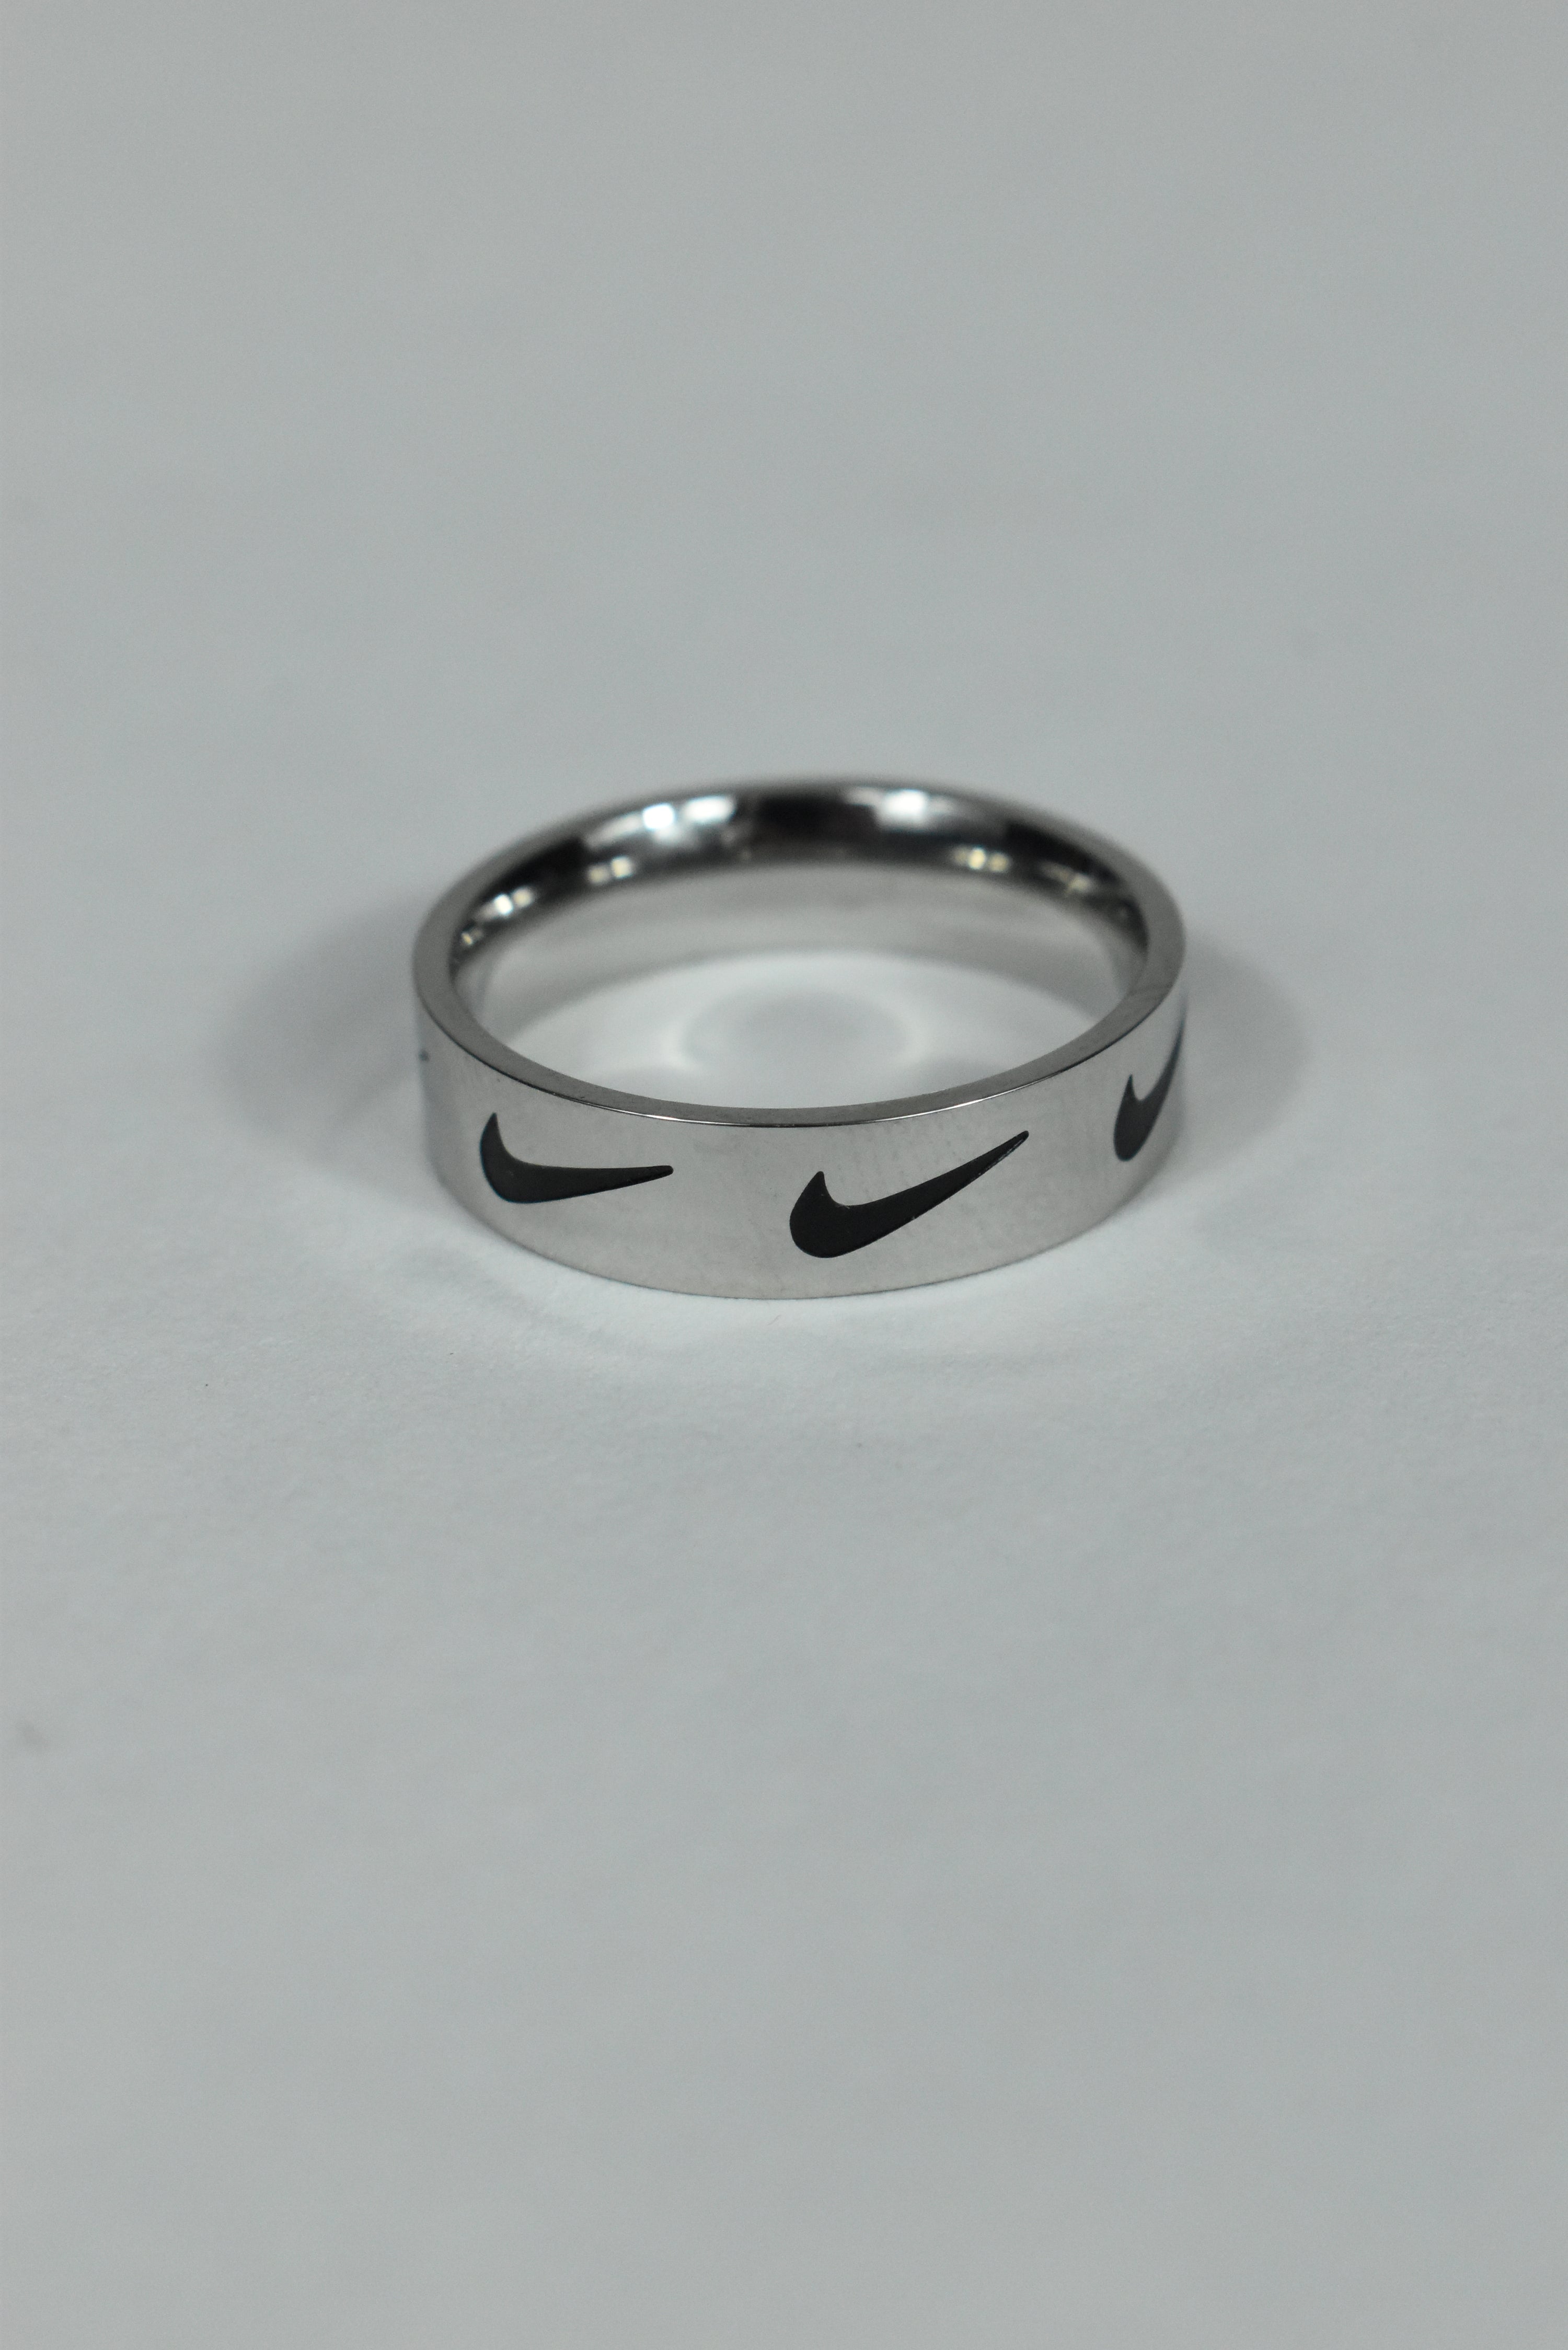 New Nike Swoosh Ring Stainless Steel Silver